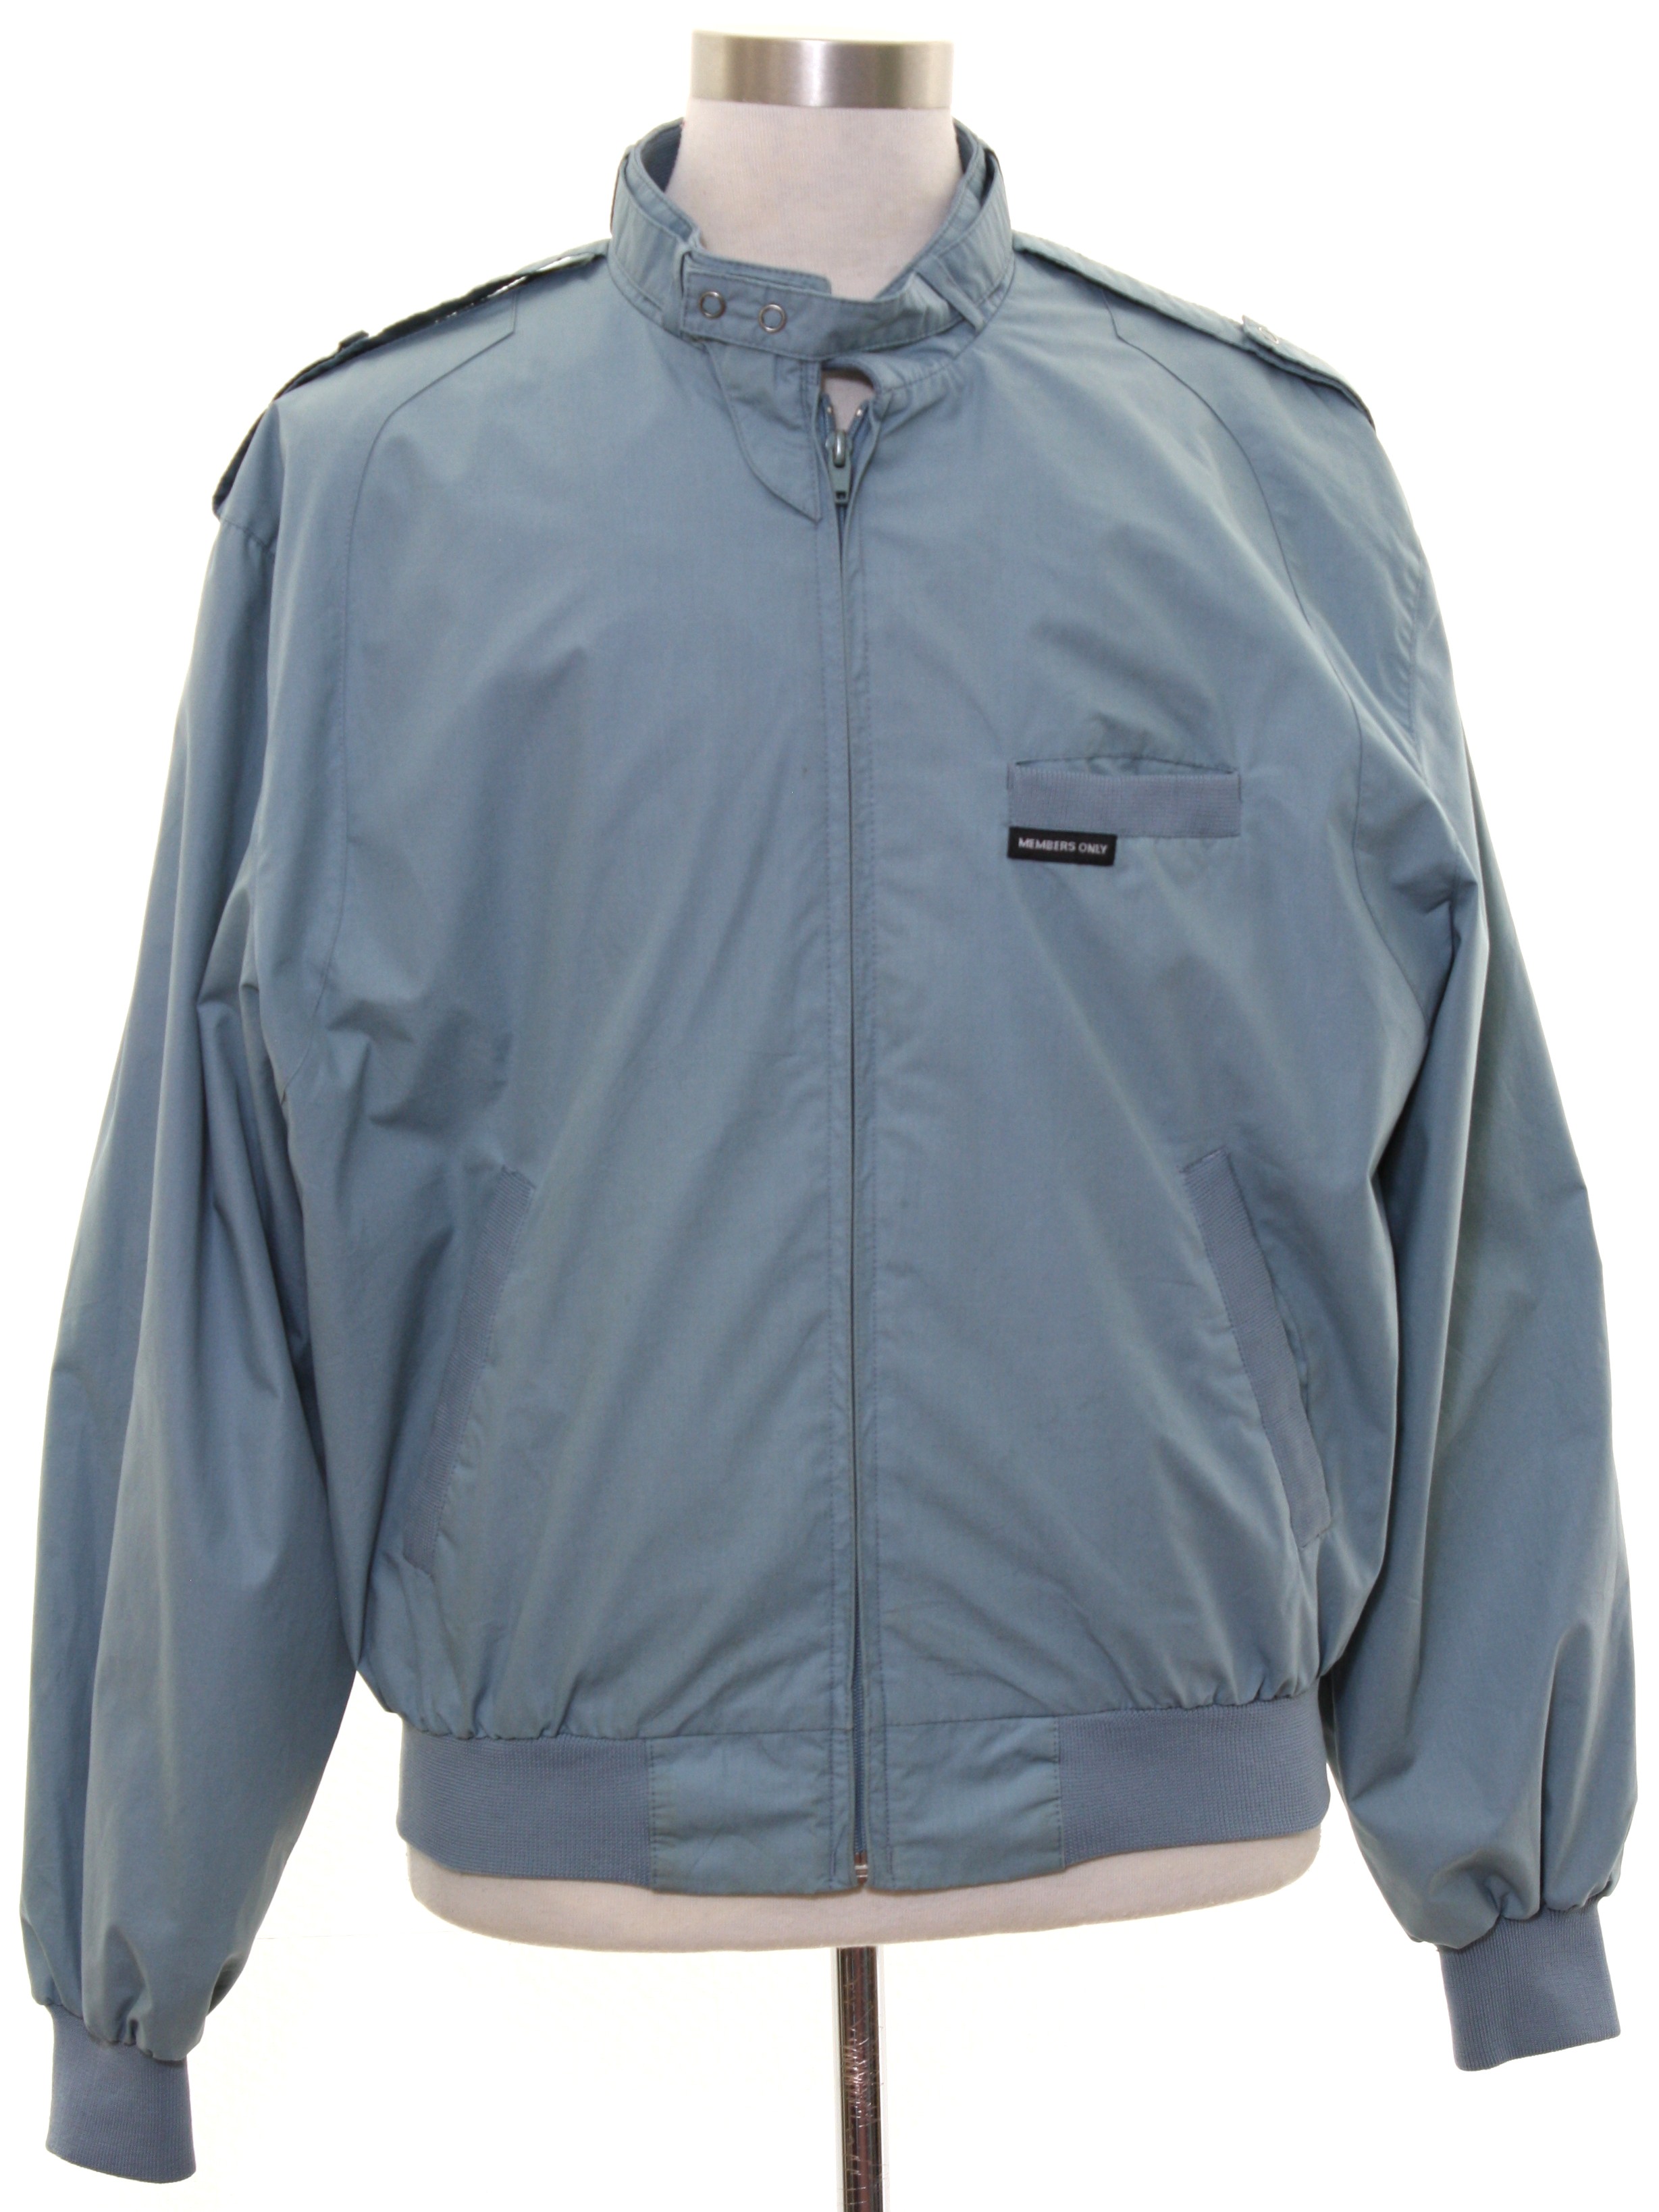 Retro 1980's Jacket (Members Only) : 80s -Members Only- Mens dusty aqua ...